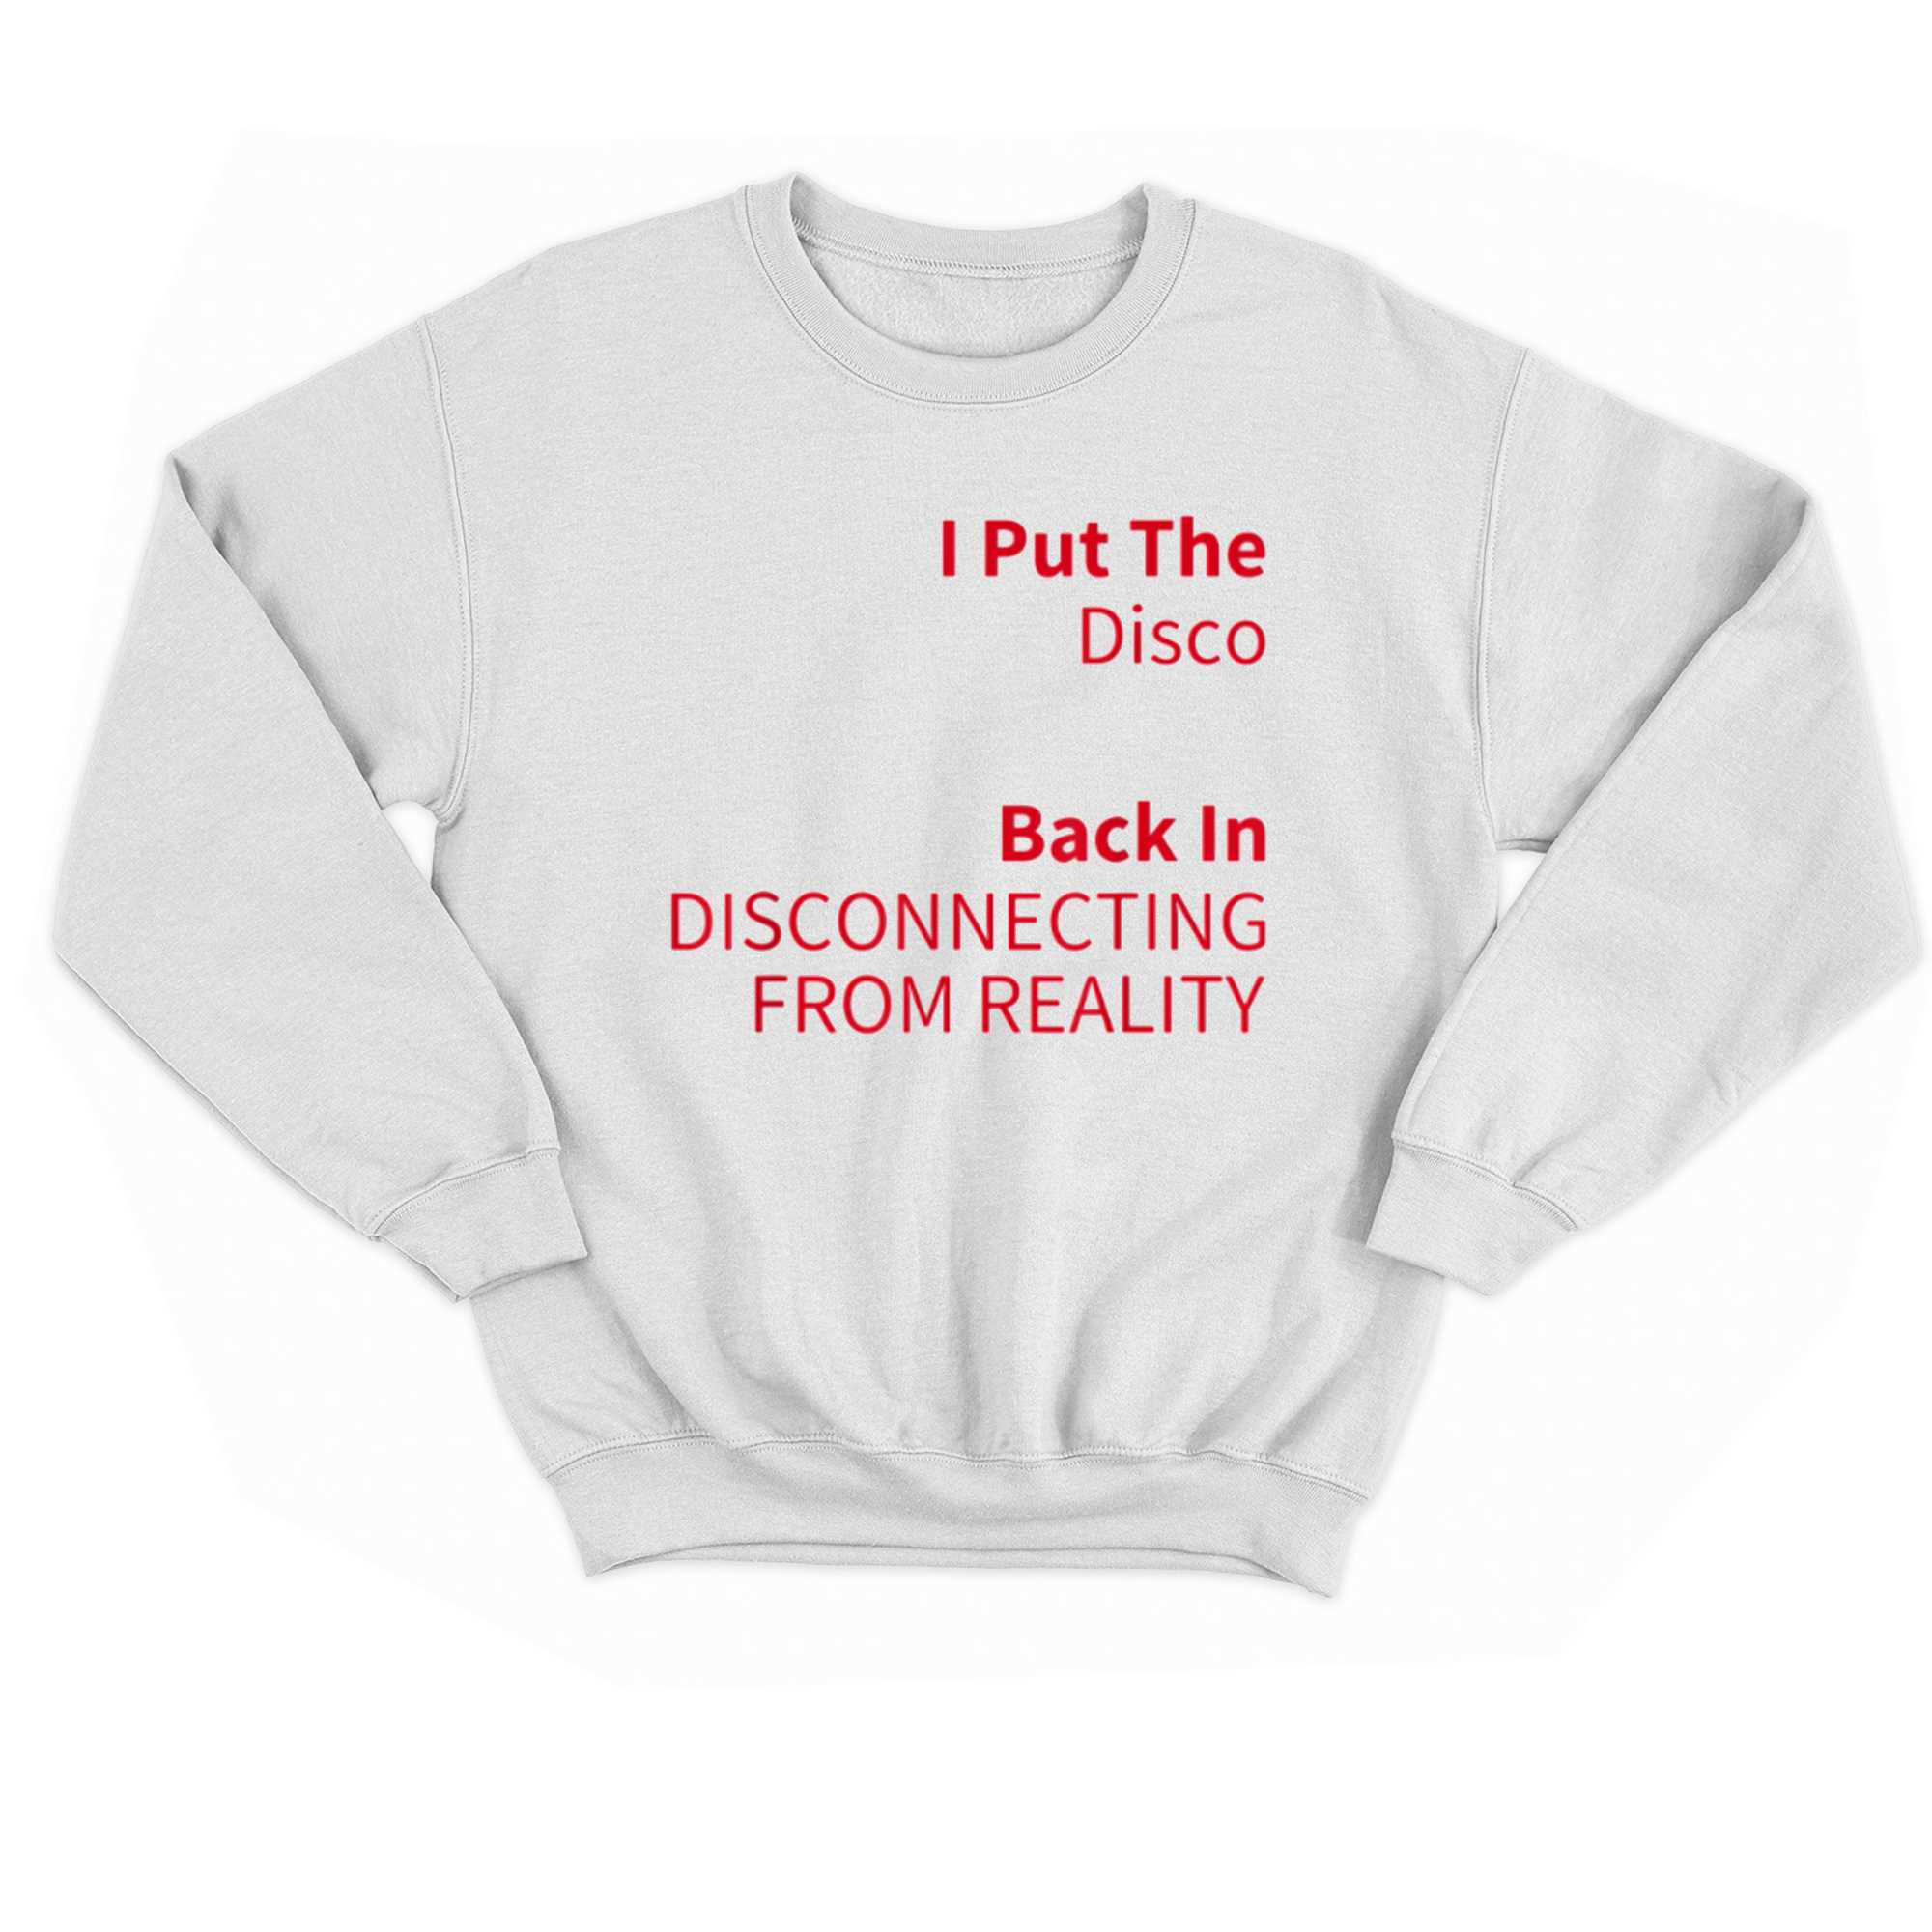 I Put The Disco Back In Disconnecting From Reality T-shirt 